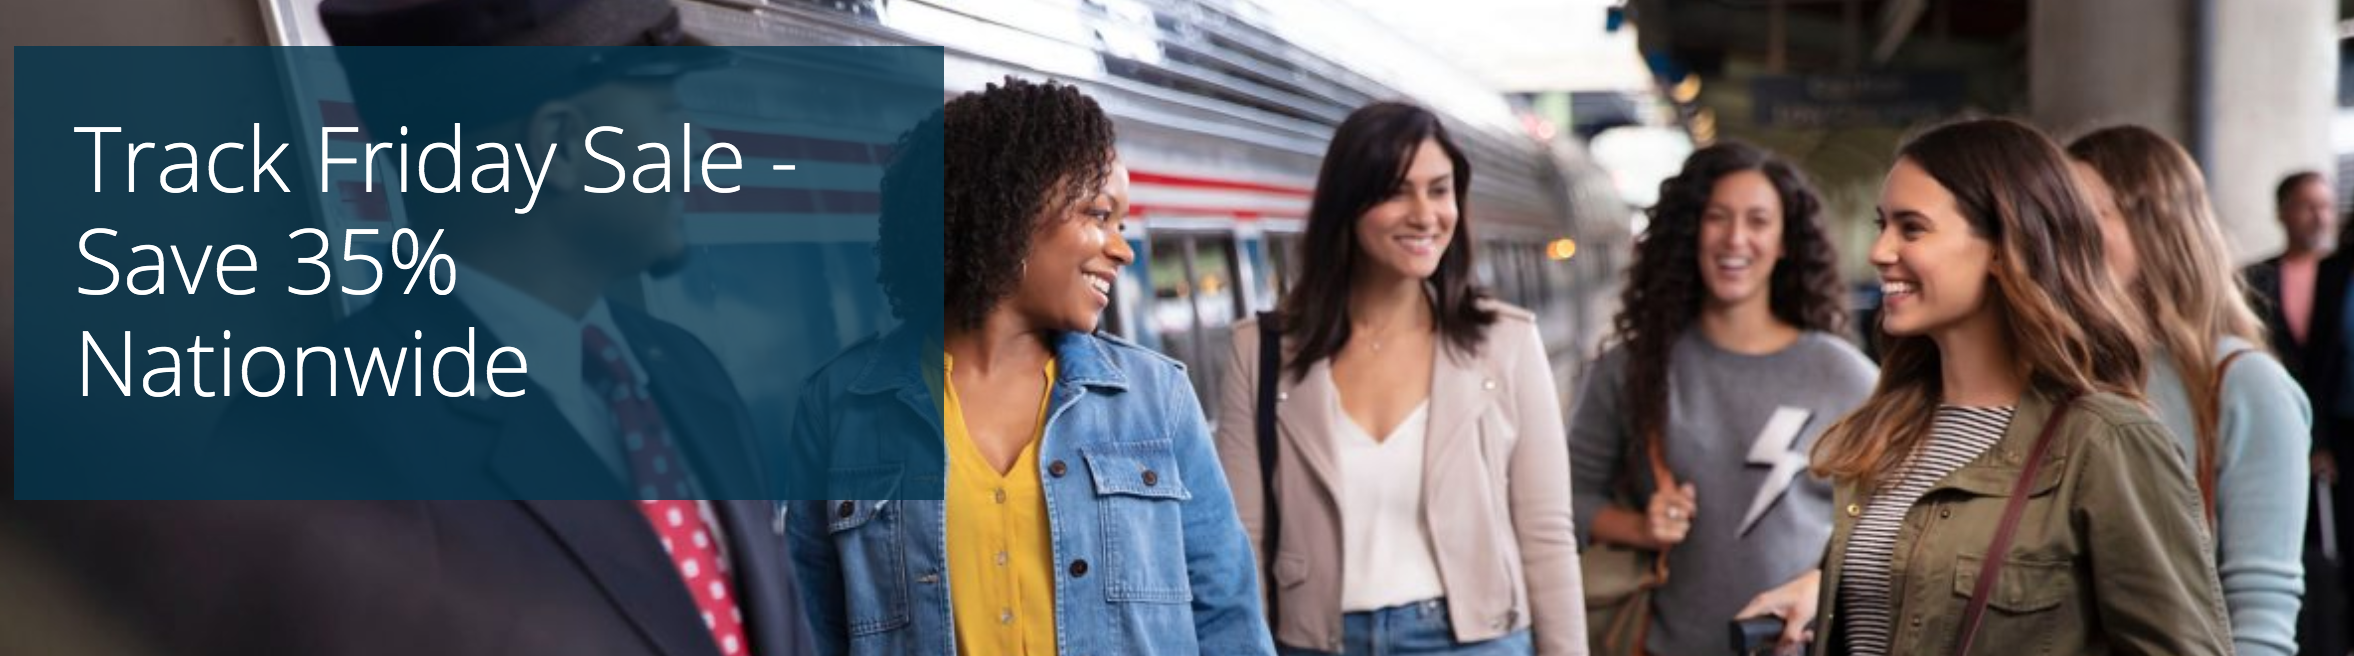 amtrak black friday promotion is offering 35% off train travel